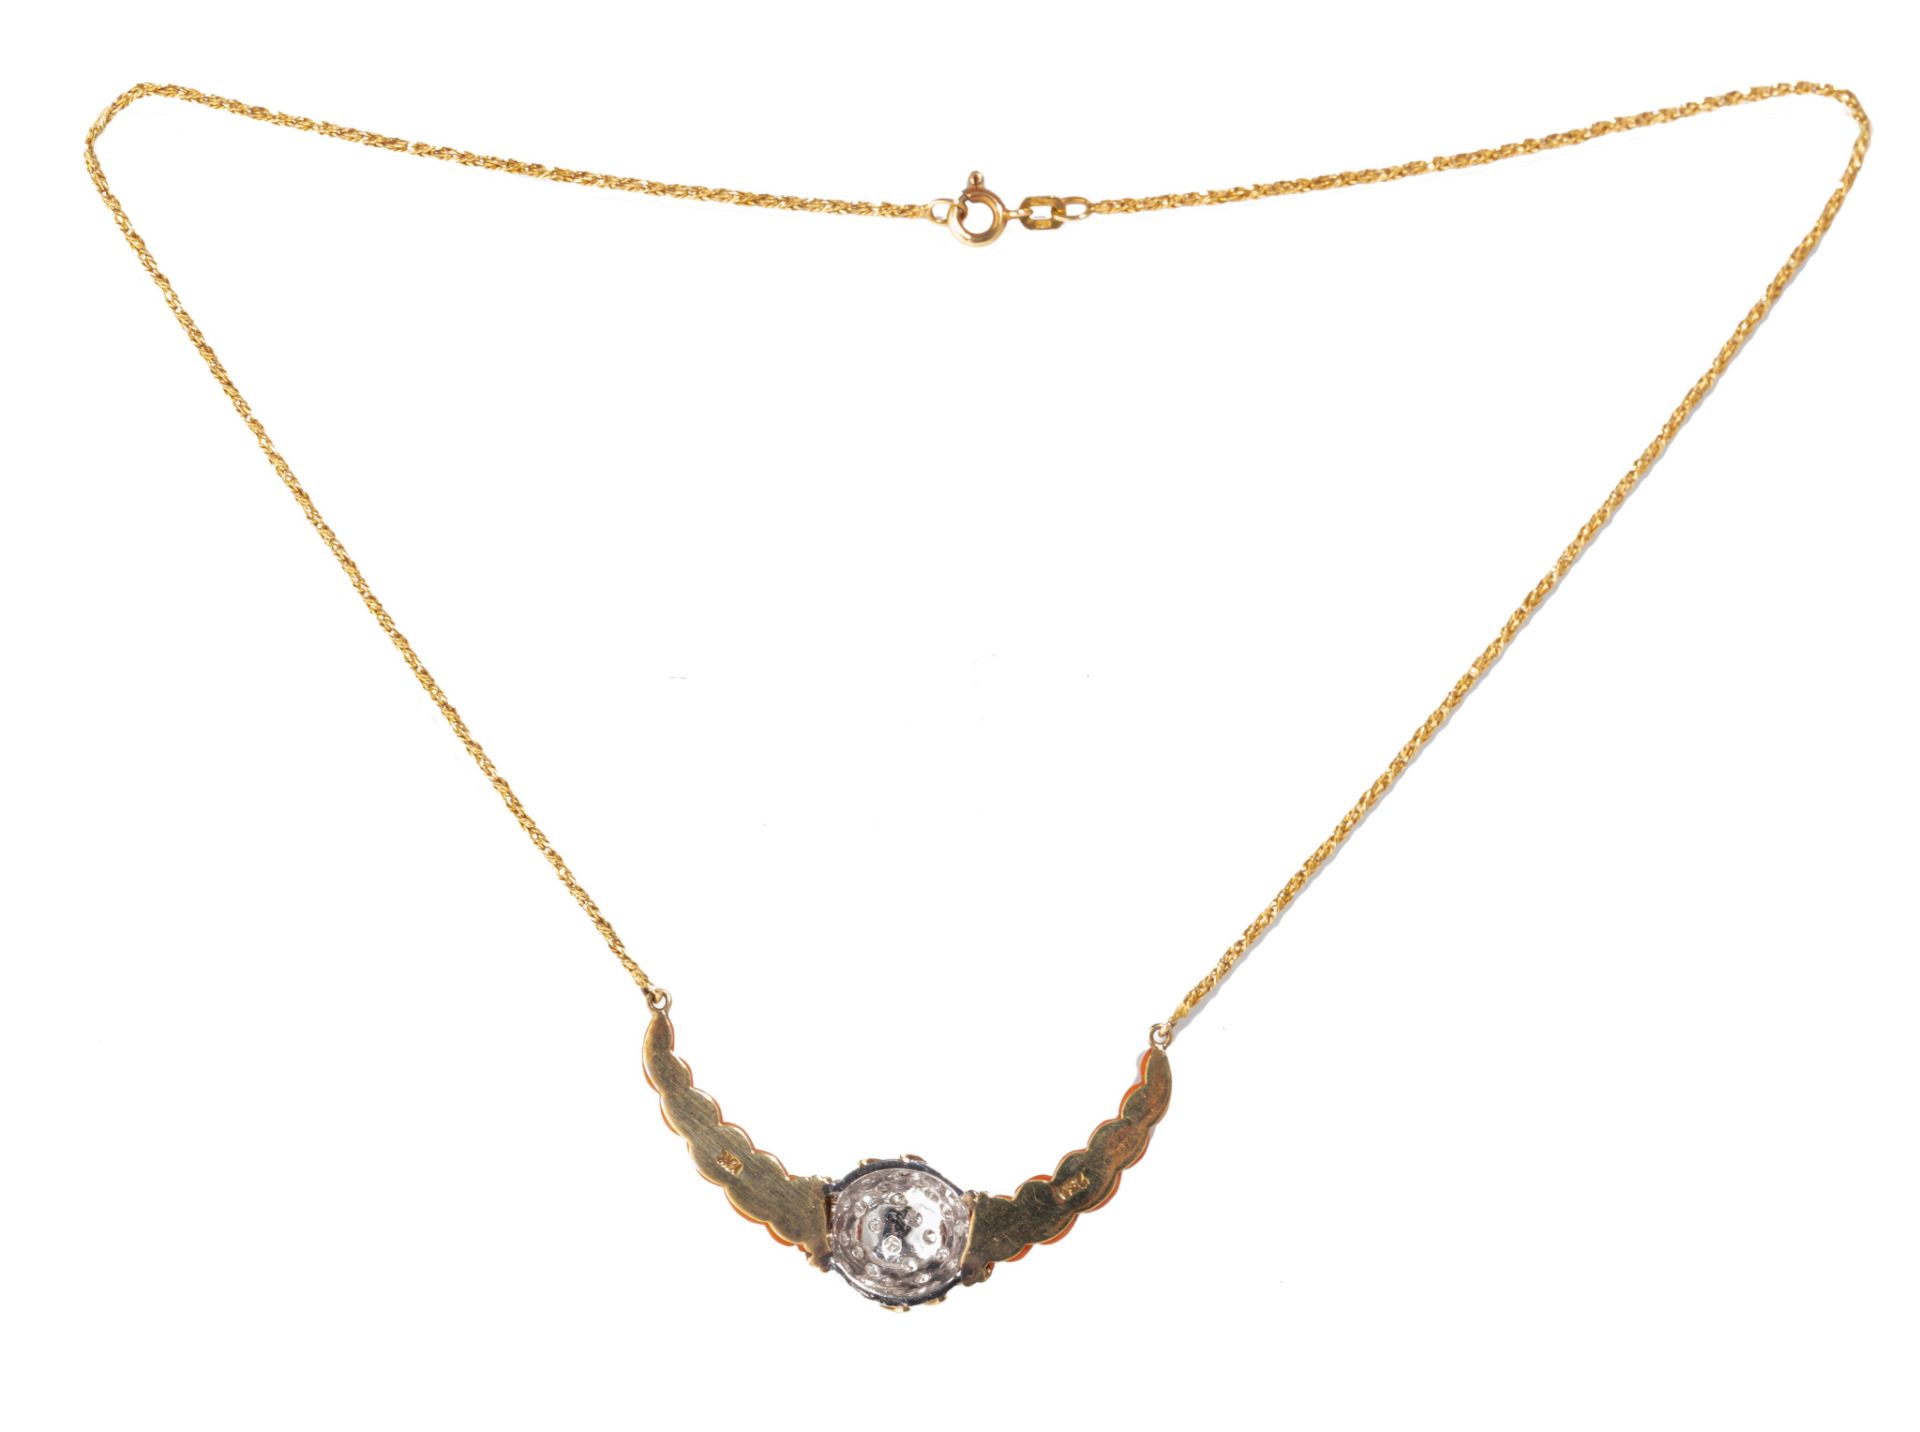 An 18ct yellow gold necklace, the pendant set with corals and brilliant-cut diamonds, L 45,7 Cm - Image 3 of 7